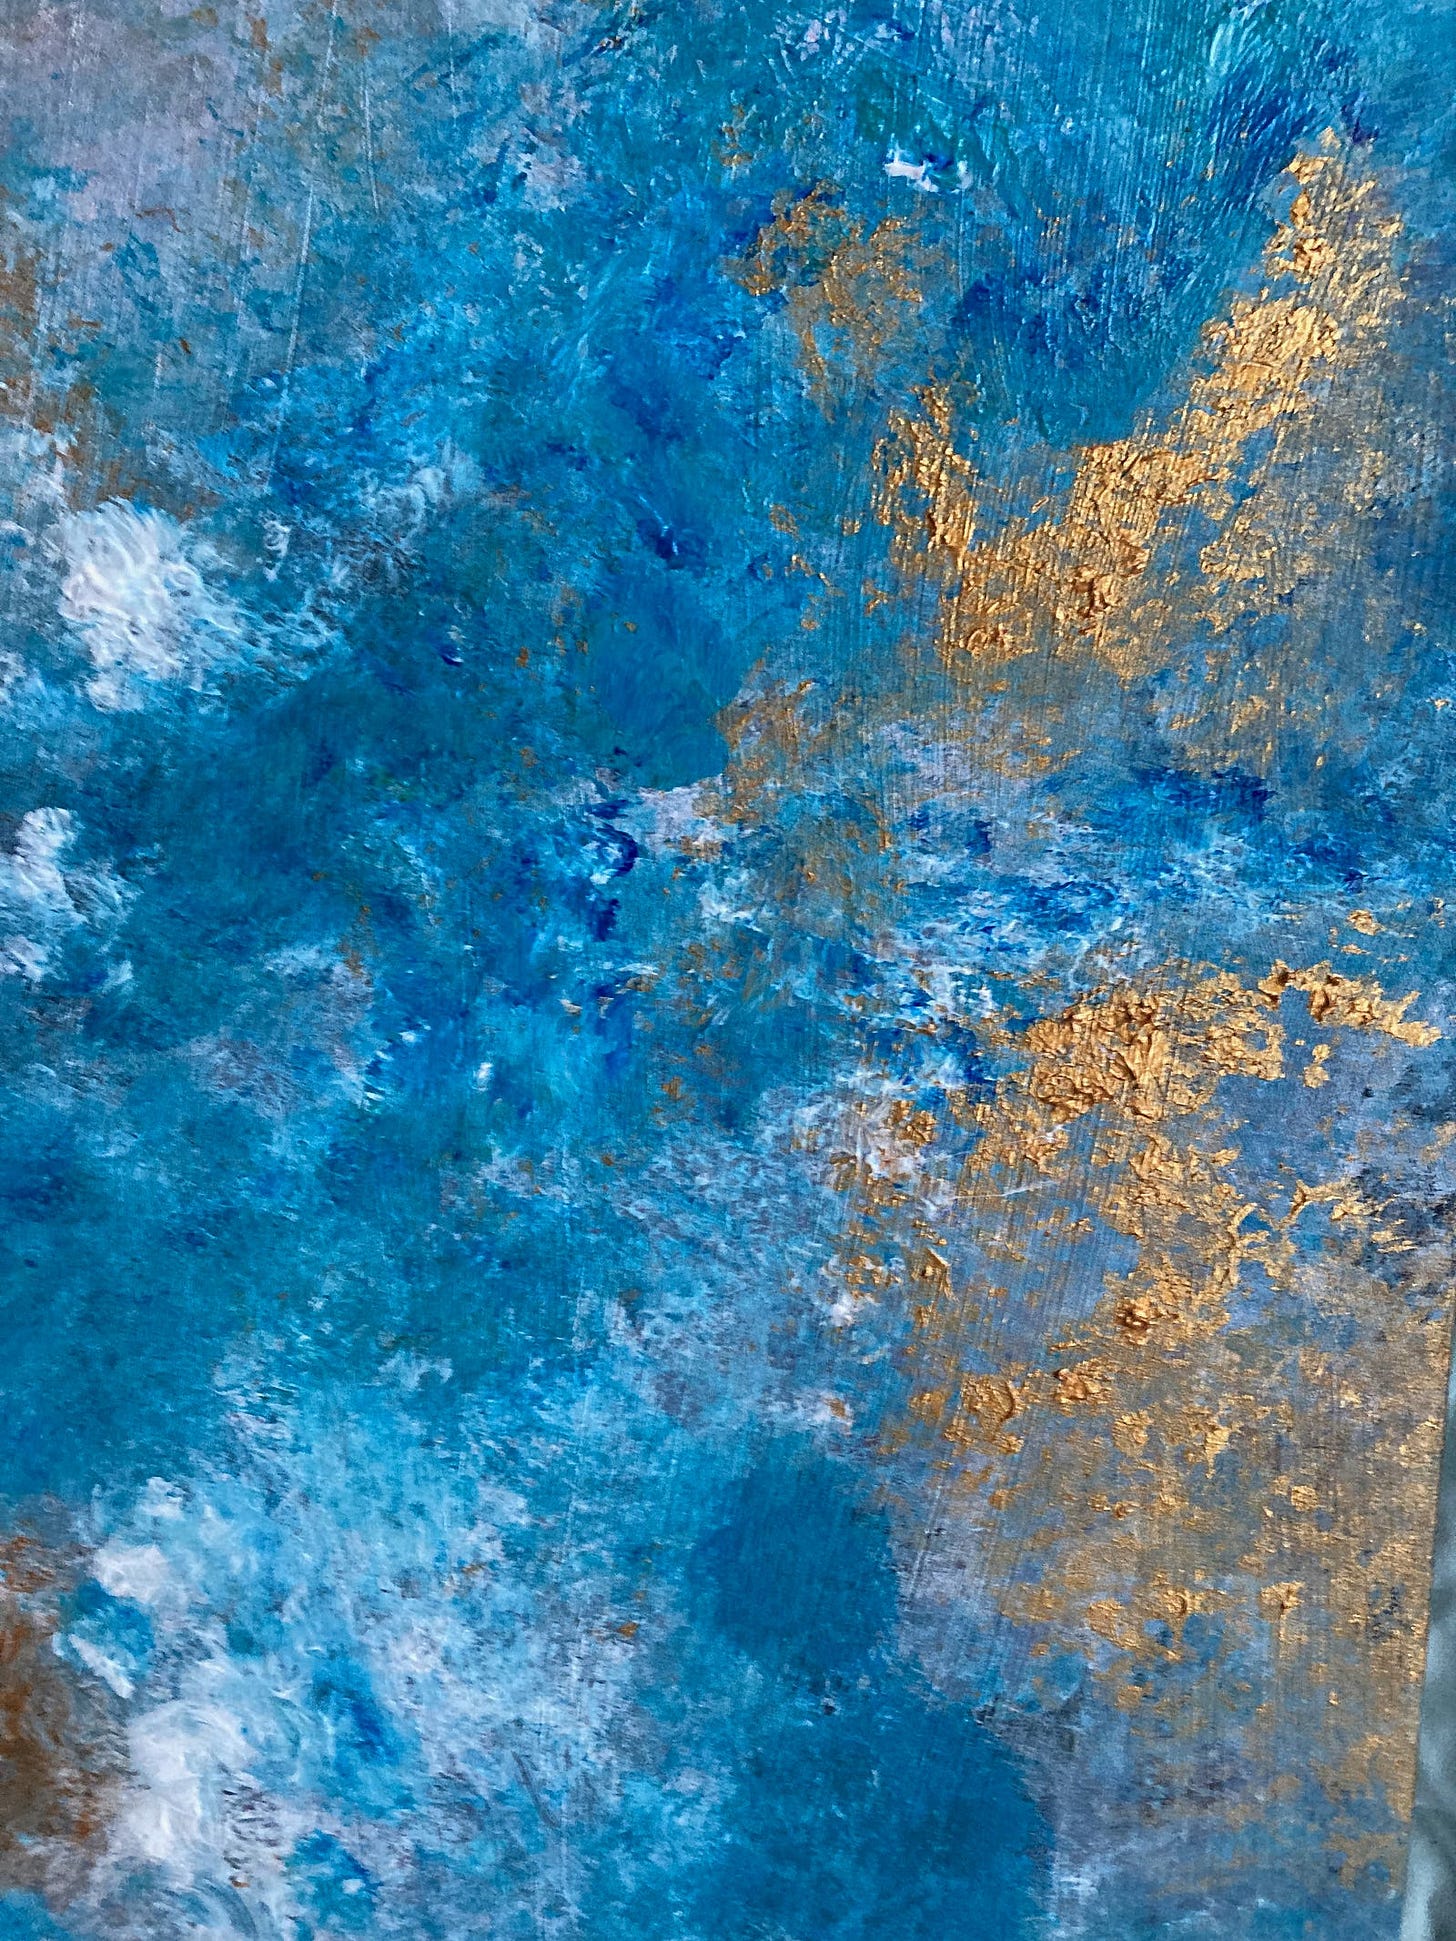 Abstract in turquoise, gold and white